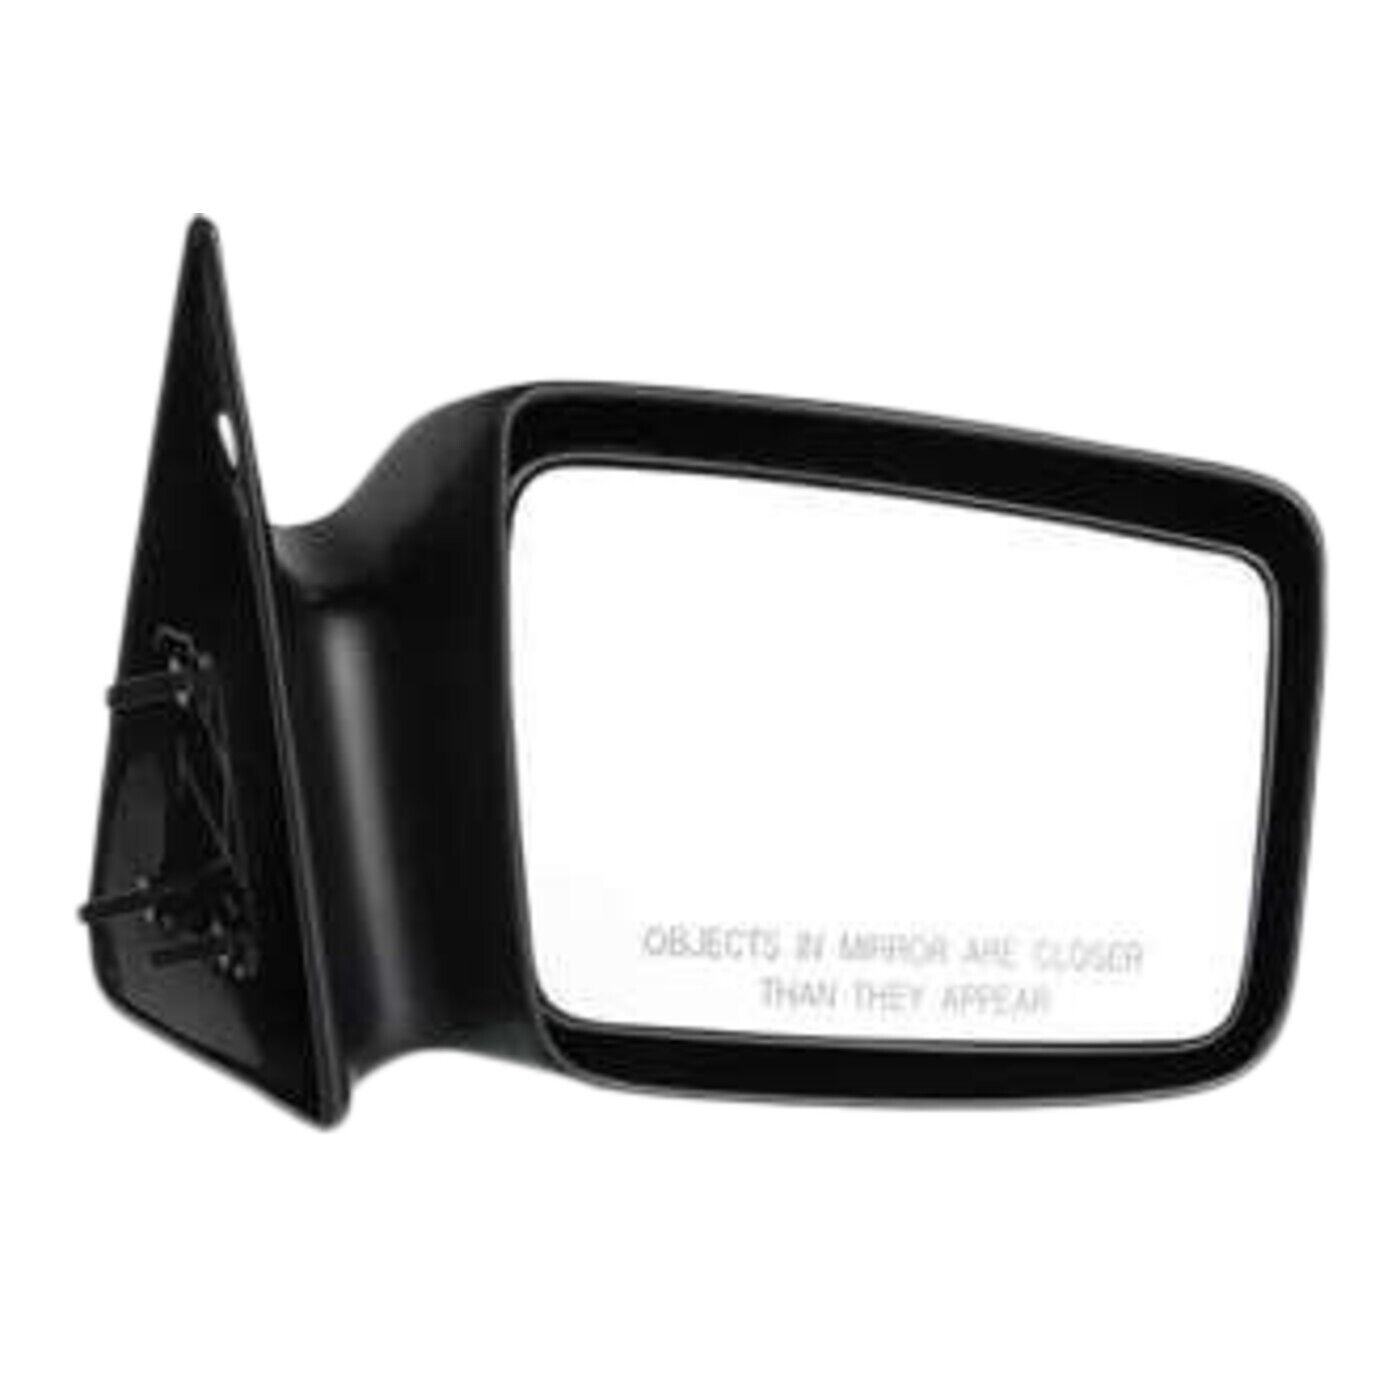 Manual Mirror For 1987-1996 Dodge Dakota Passenger Side 5 x 7 in. Paint To Match